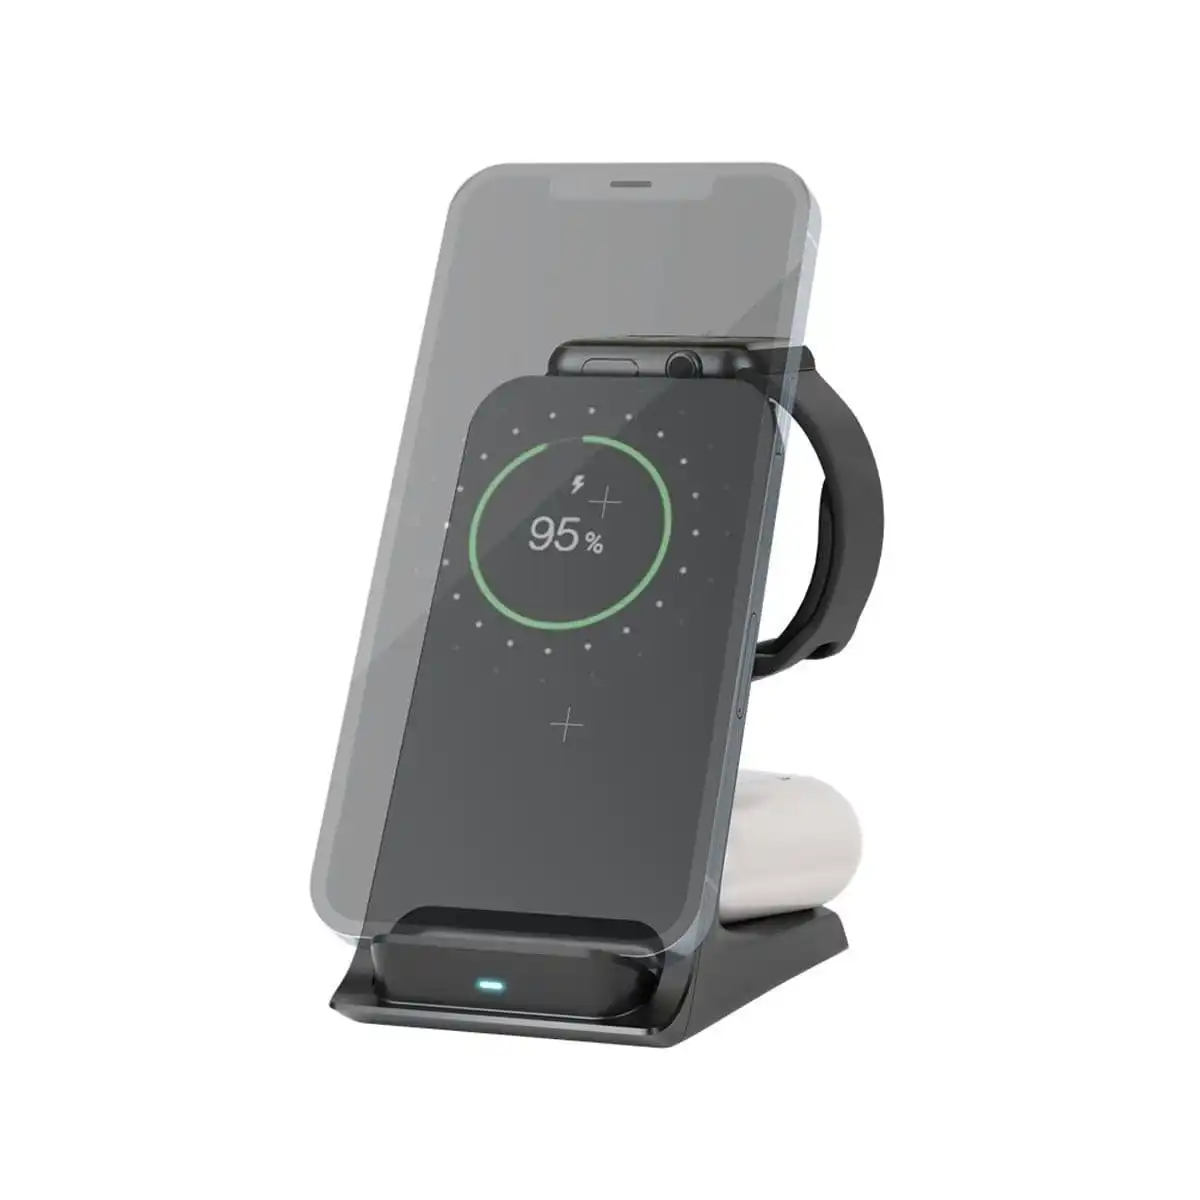 Goobay 3 in 1 Wireless Charger - Black